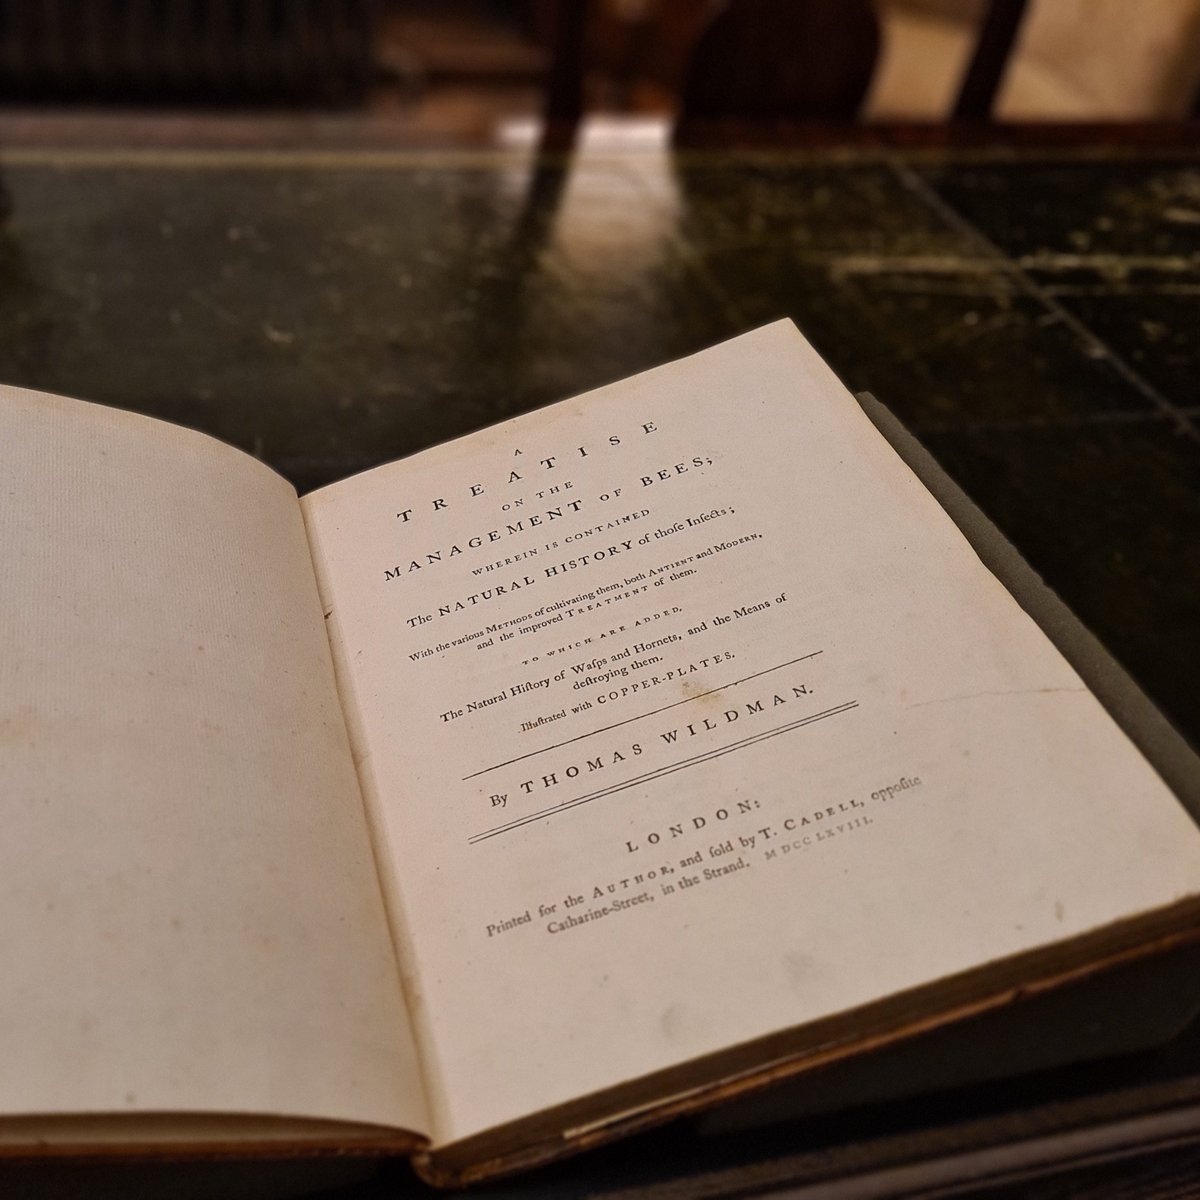 Much of the Godmersham Park Library collection was dispersed in the 20th century. In the last 5 years, @LostSheepGPL have discovered and returned 13 books from the Godmersham Library to Chawton. This bee-keeping manual is their latest donation, now on display in the Library.